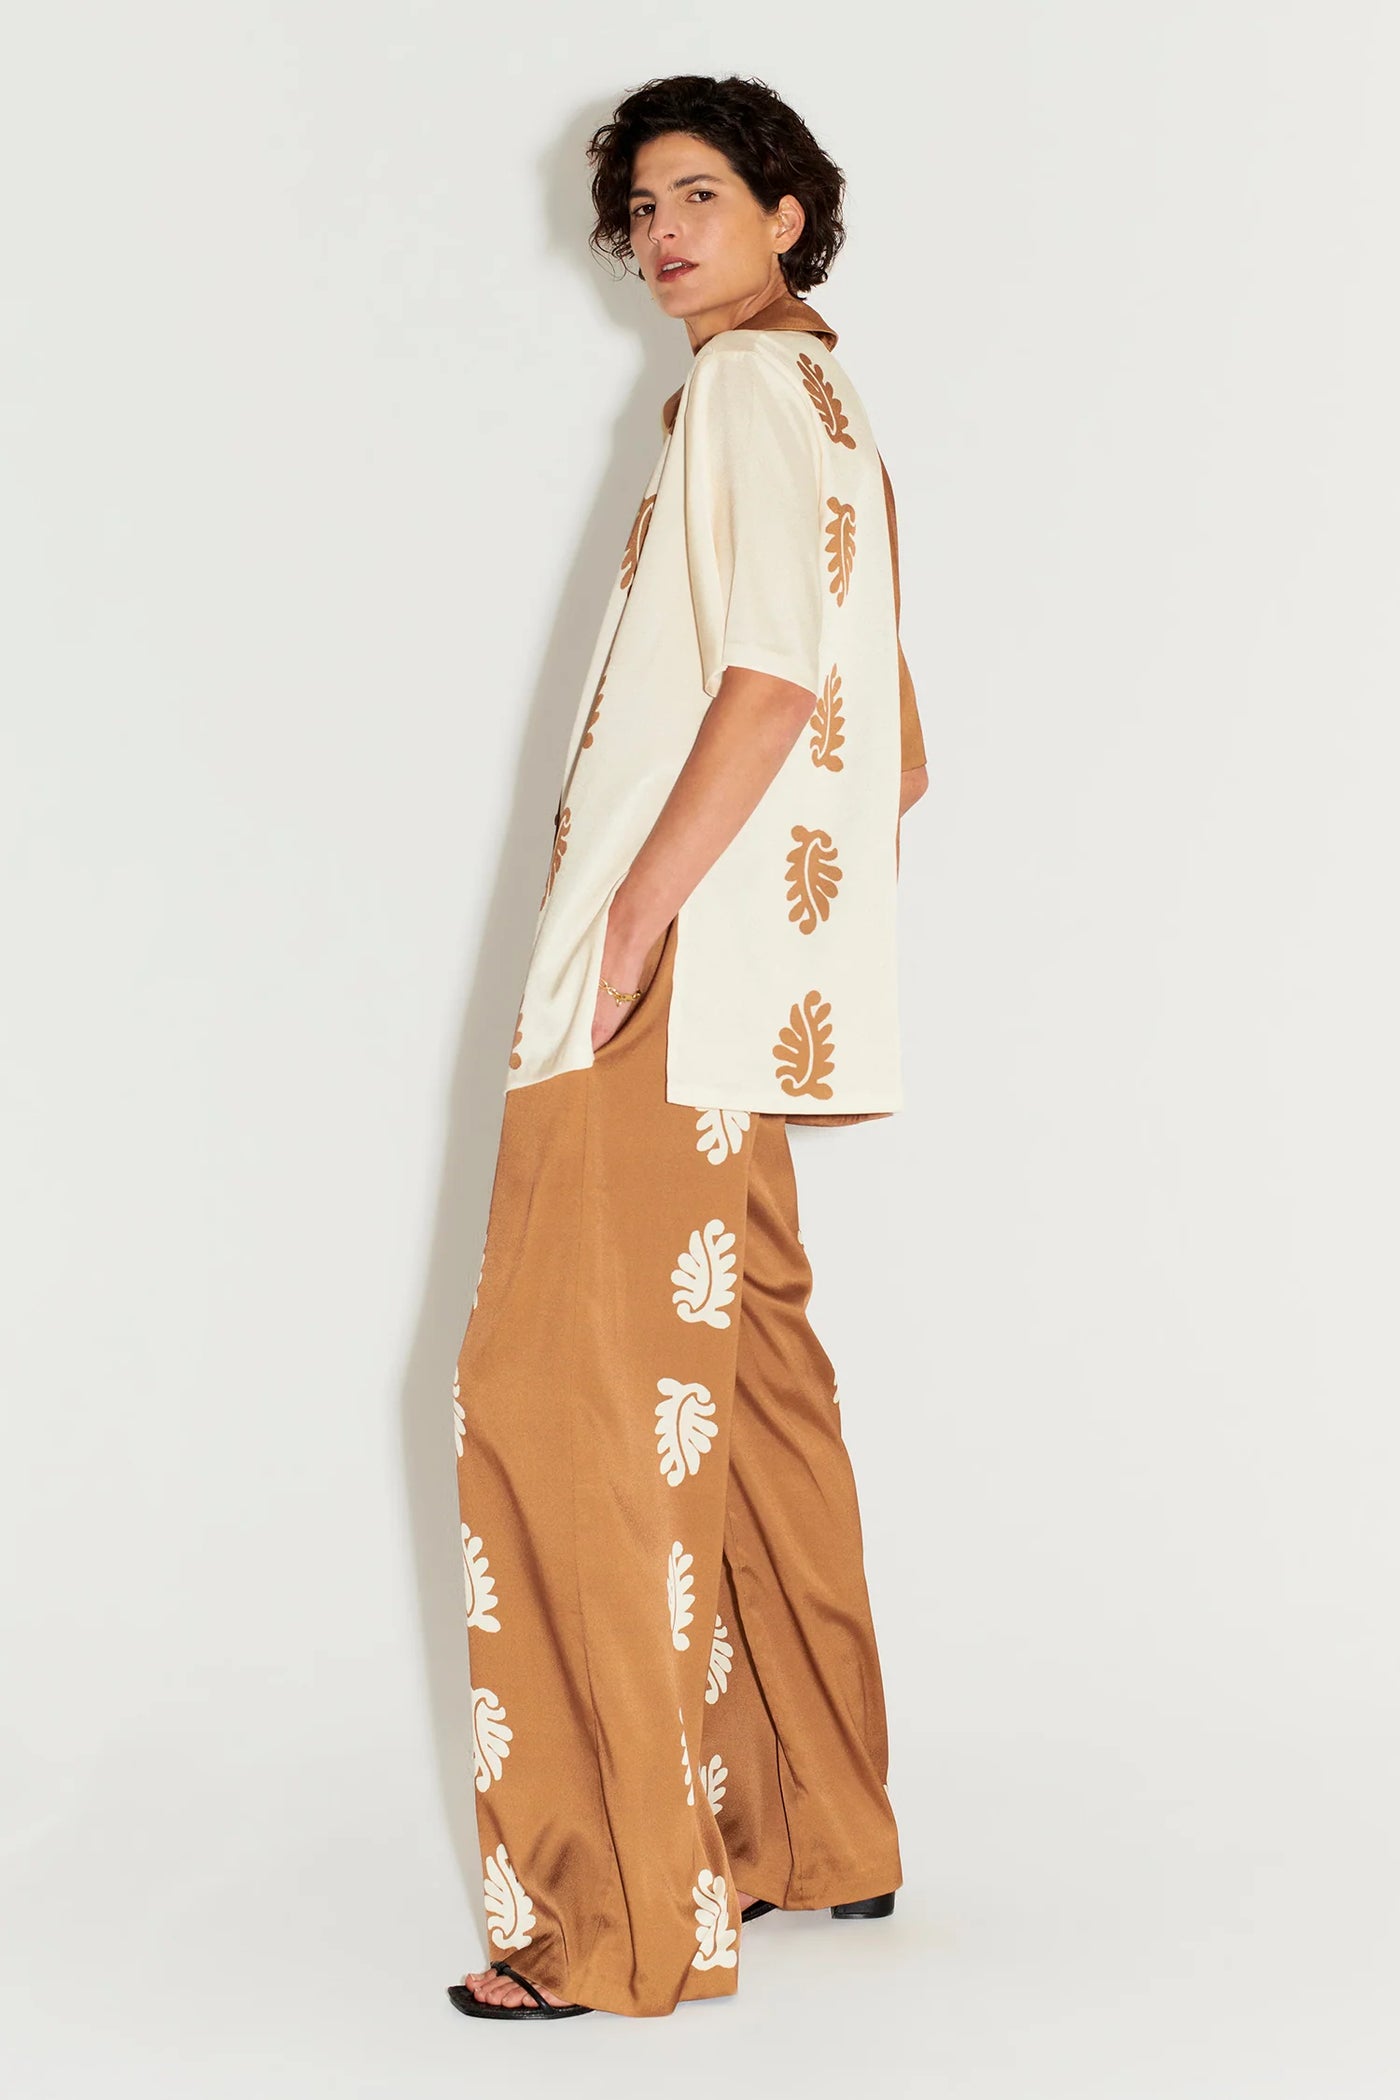 Bowden Relaxed Pant - Stencil Leaf